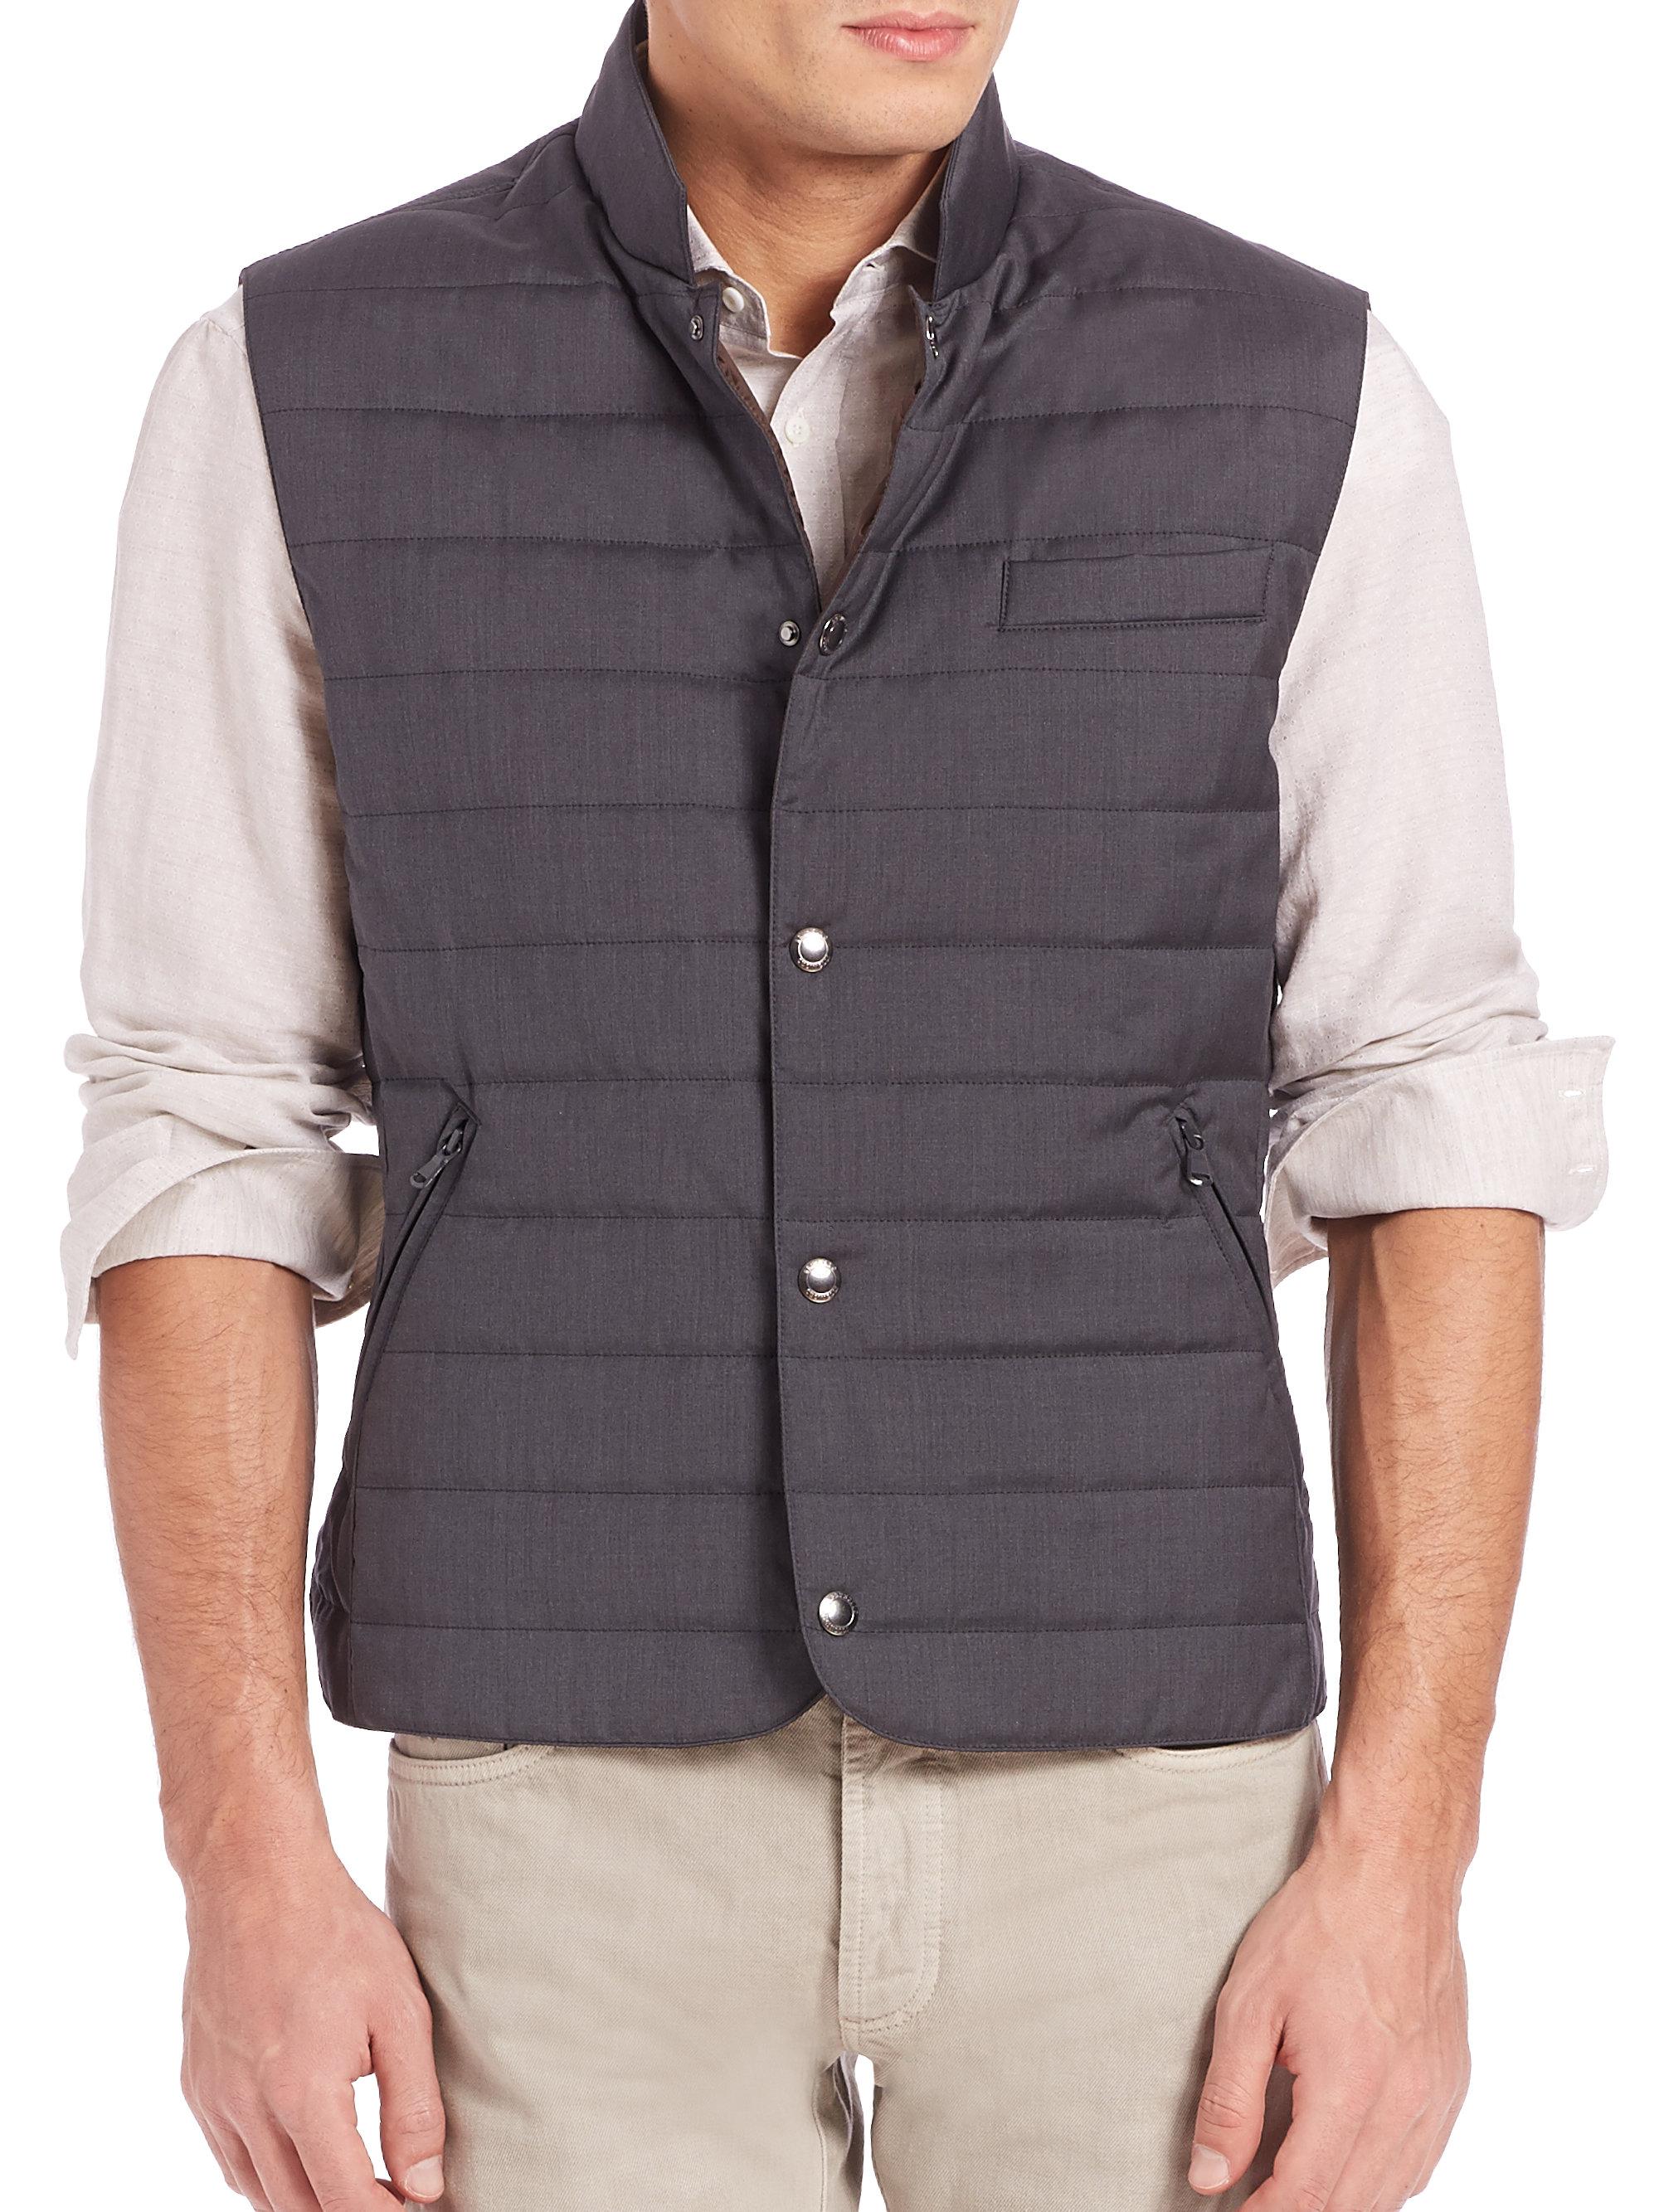 Lyst - Brunello Cucinelli Quilted Vest in Gray for Men